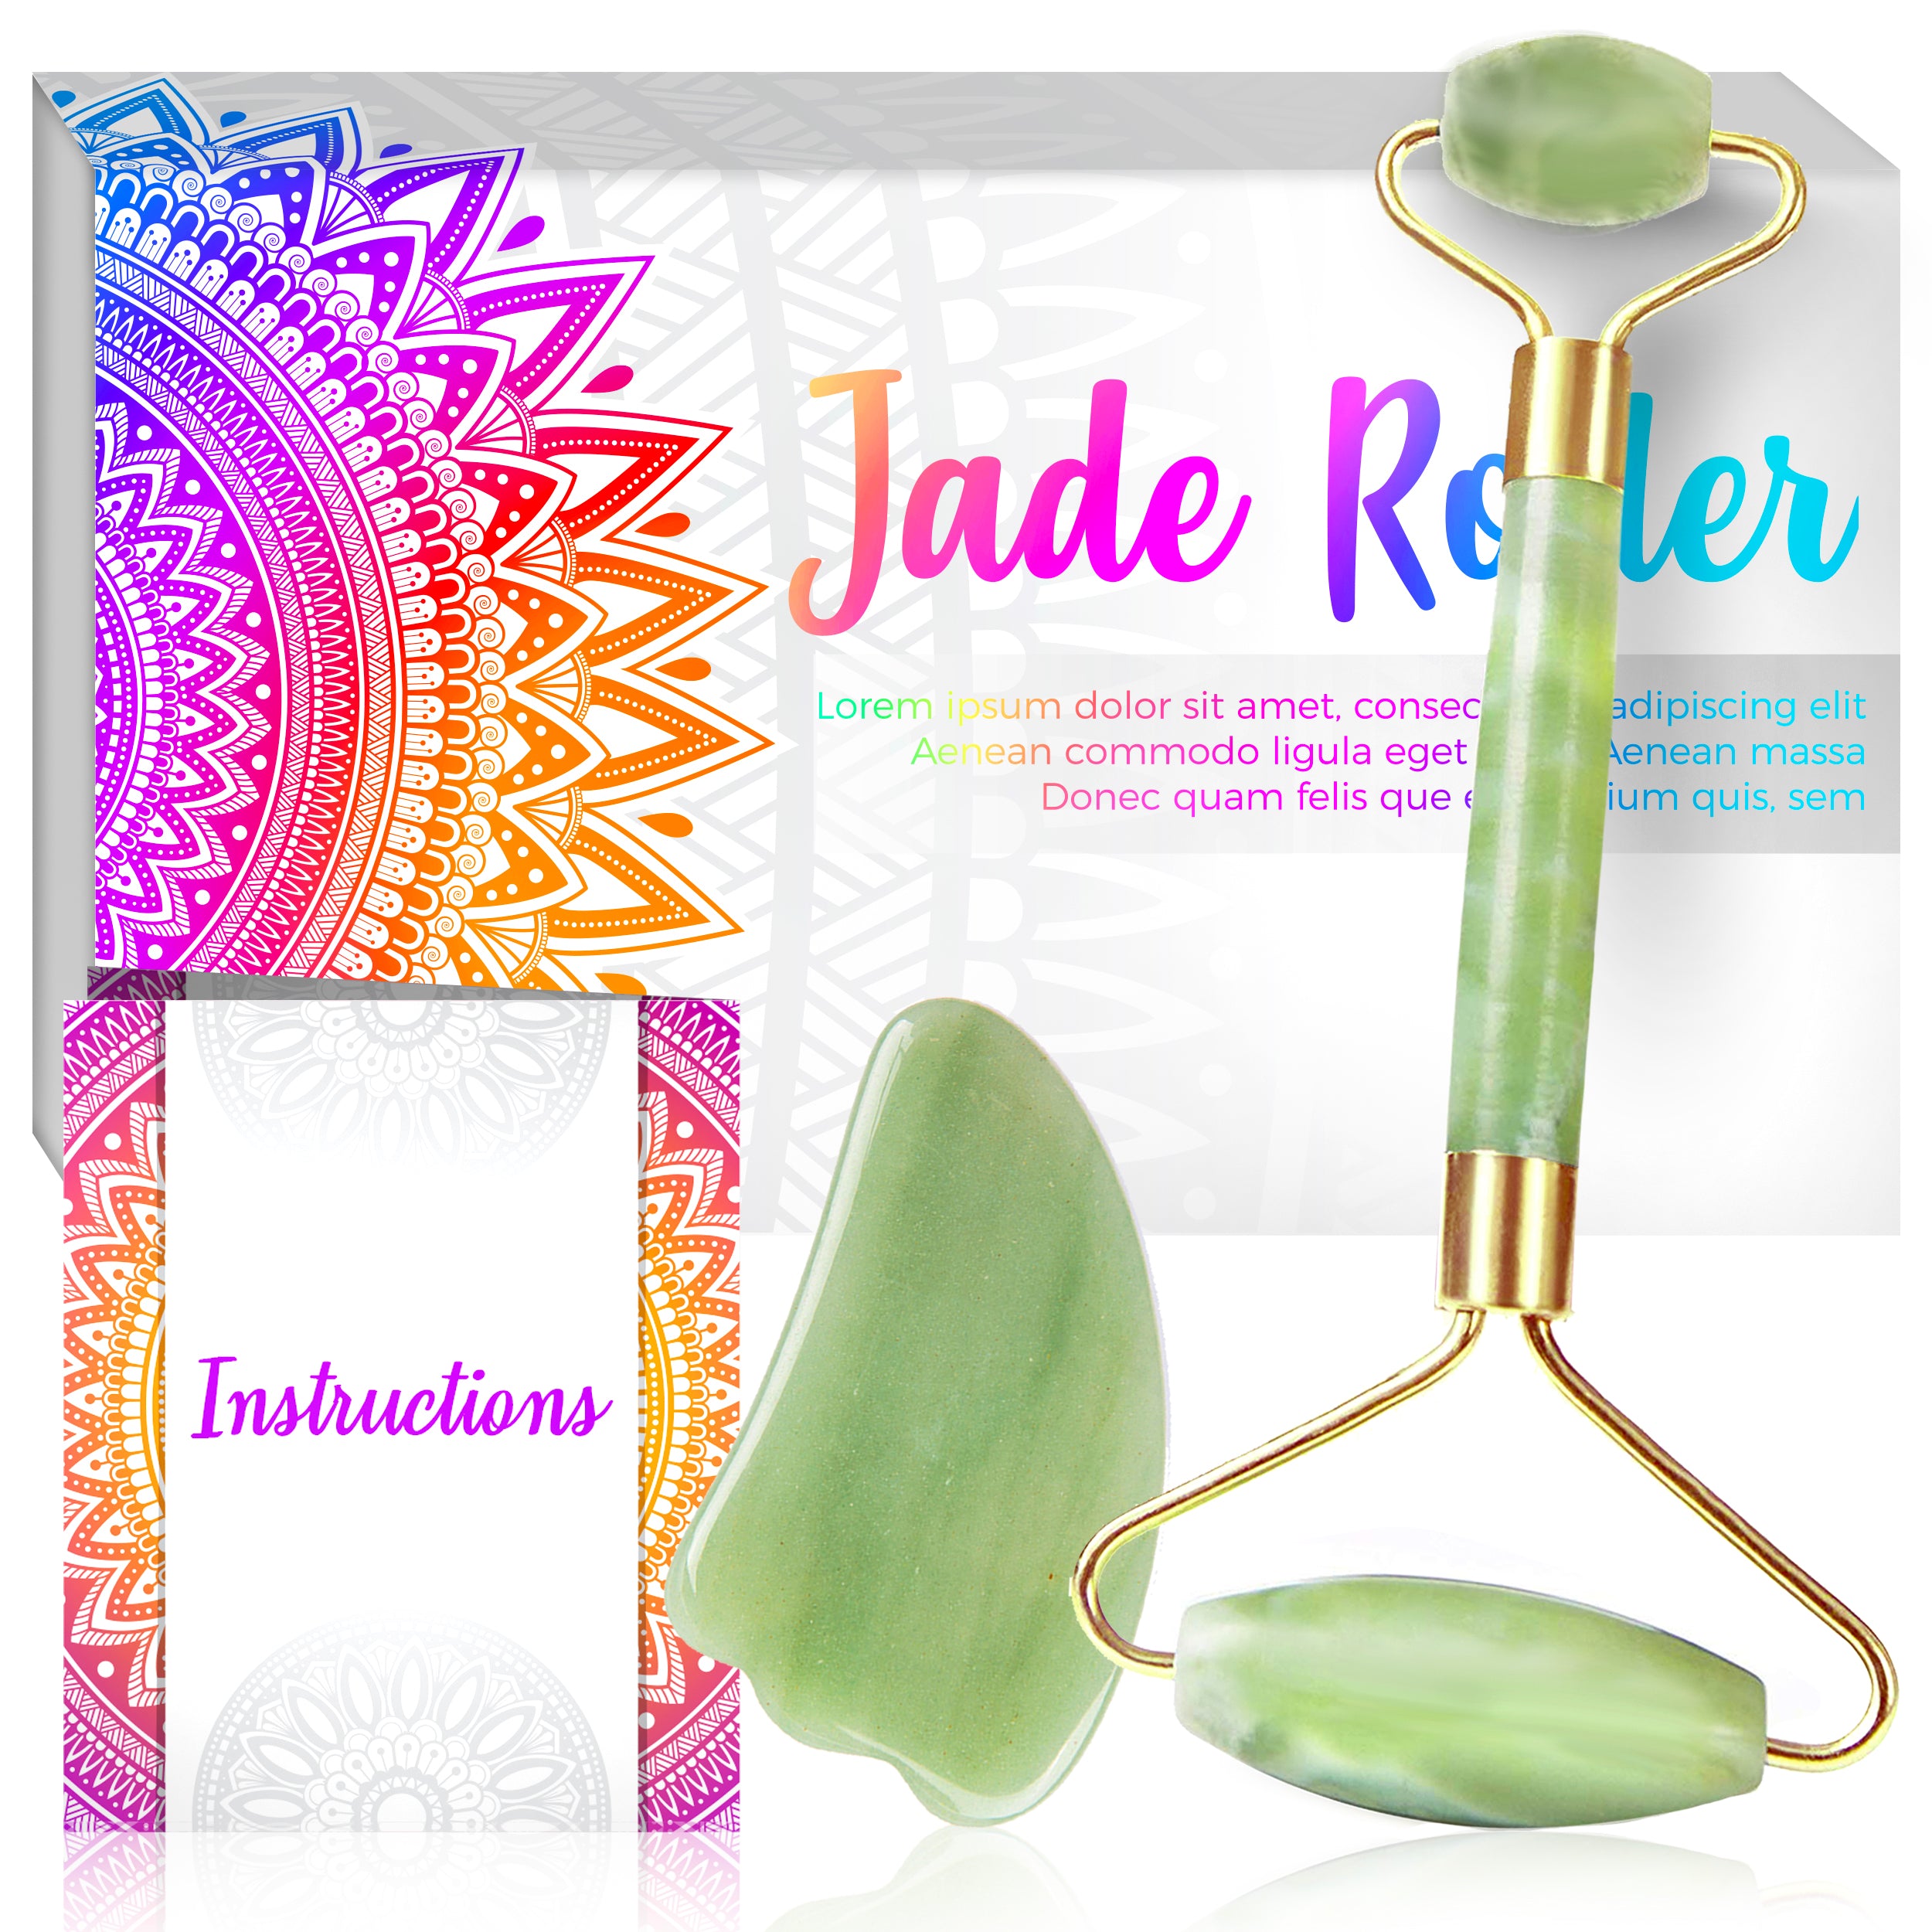 Natural Jade Roller For Face - Aging Wrinkles, Puffiness Facial Skin Massager Treatment Therapy - Premium Authentic Himalayan Jade Stone